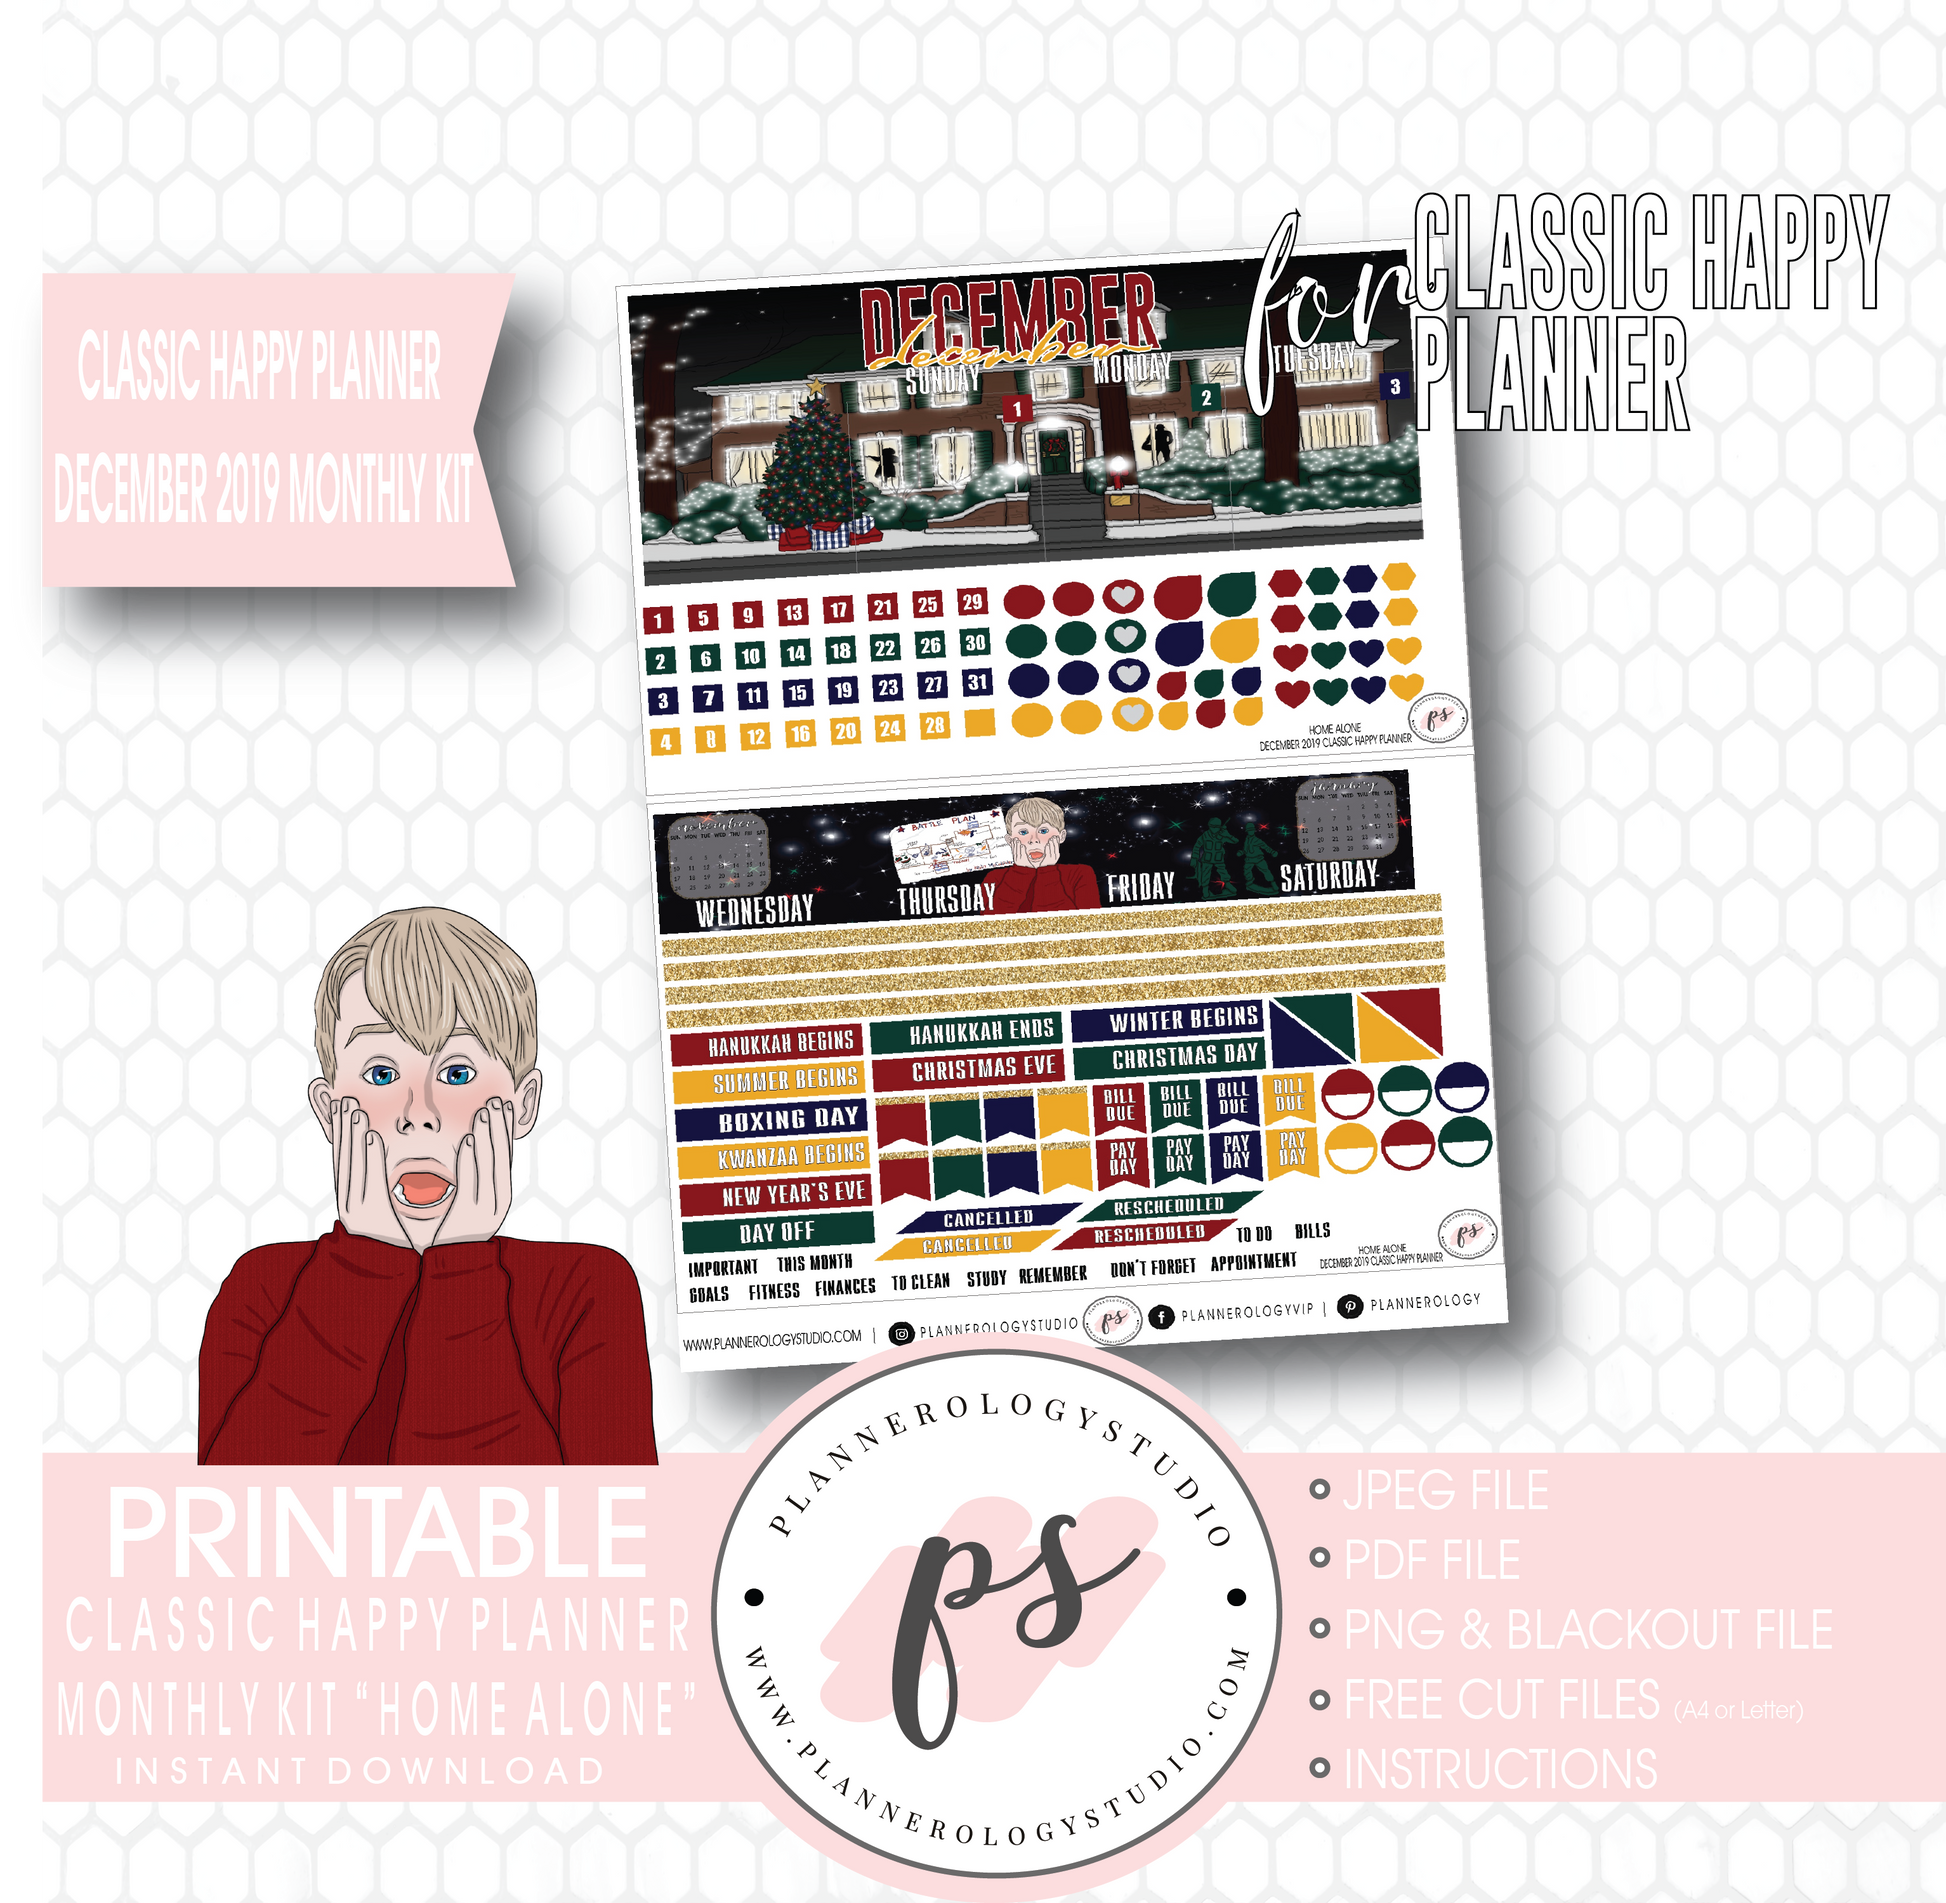 Home Alone Christmas December 2019 Monthly View Kit Digital Printable Planner Stickers (for use with Classic Happy Planner) - Plannerologystudio